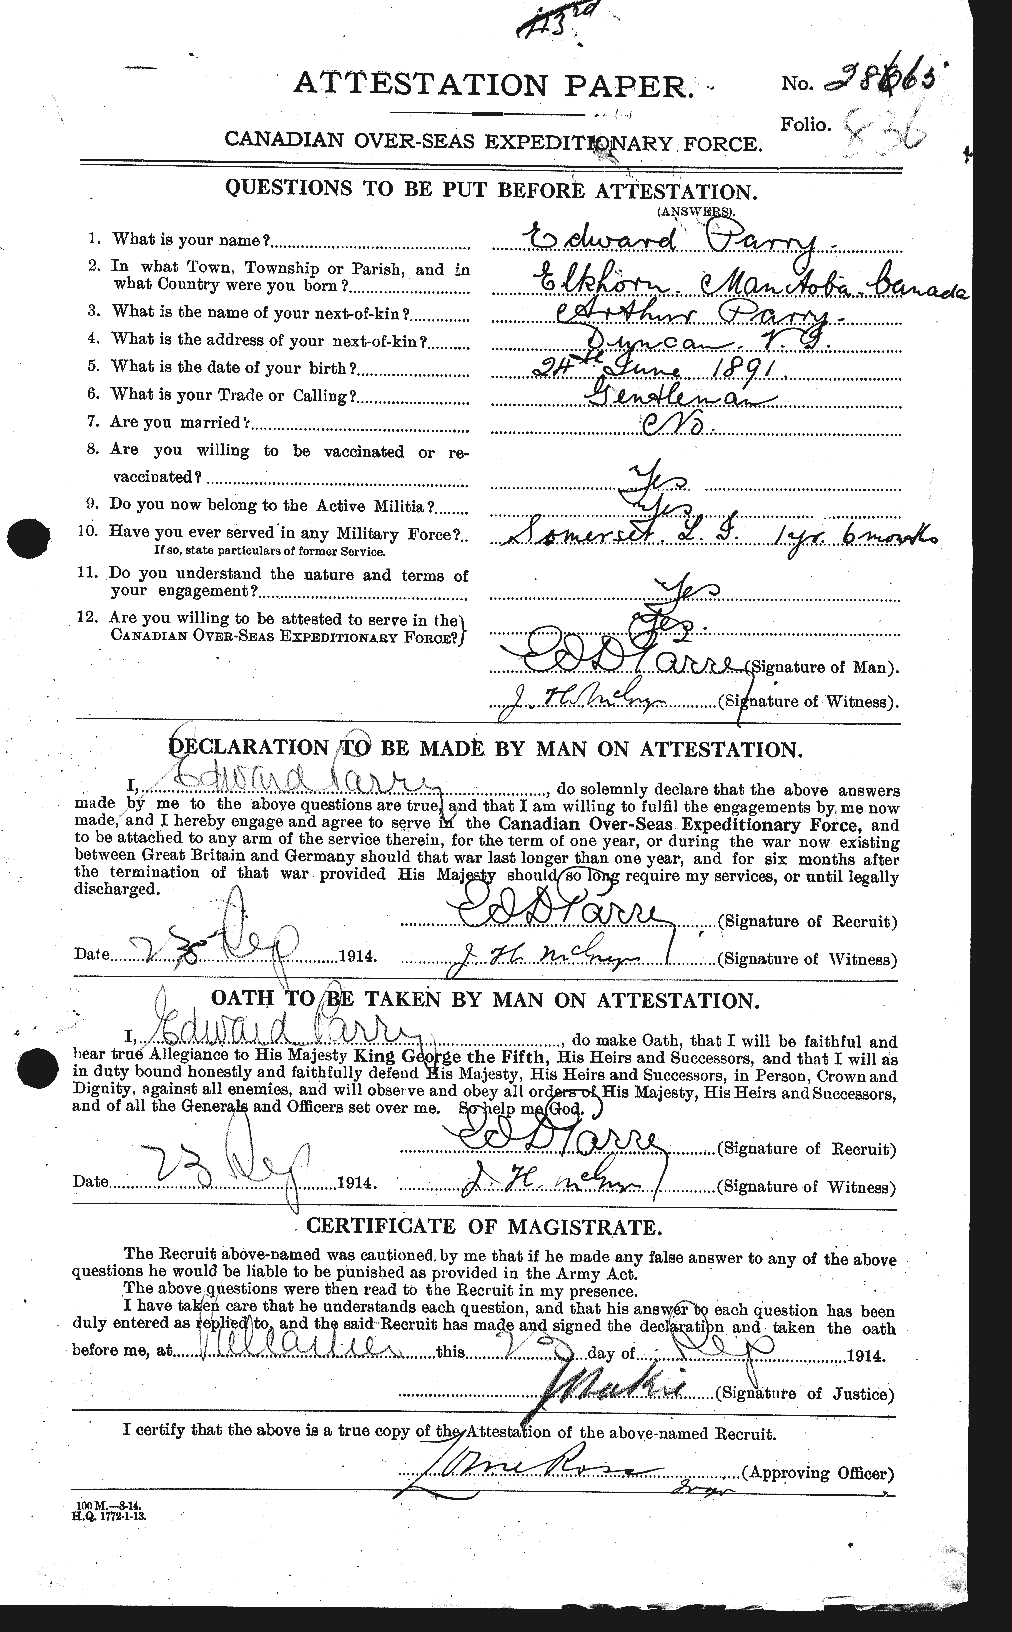 Personnel Records of the First World War - CEF 566595a